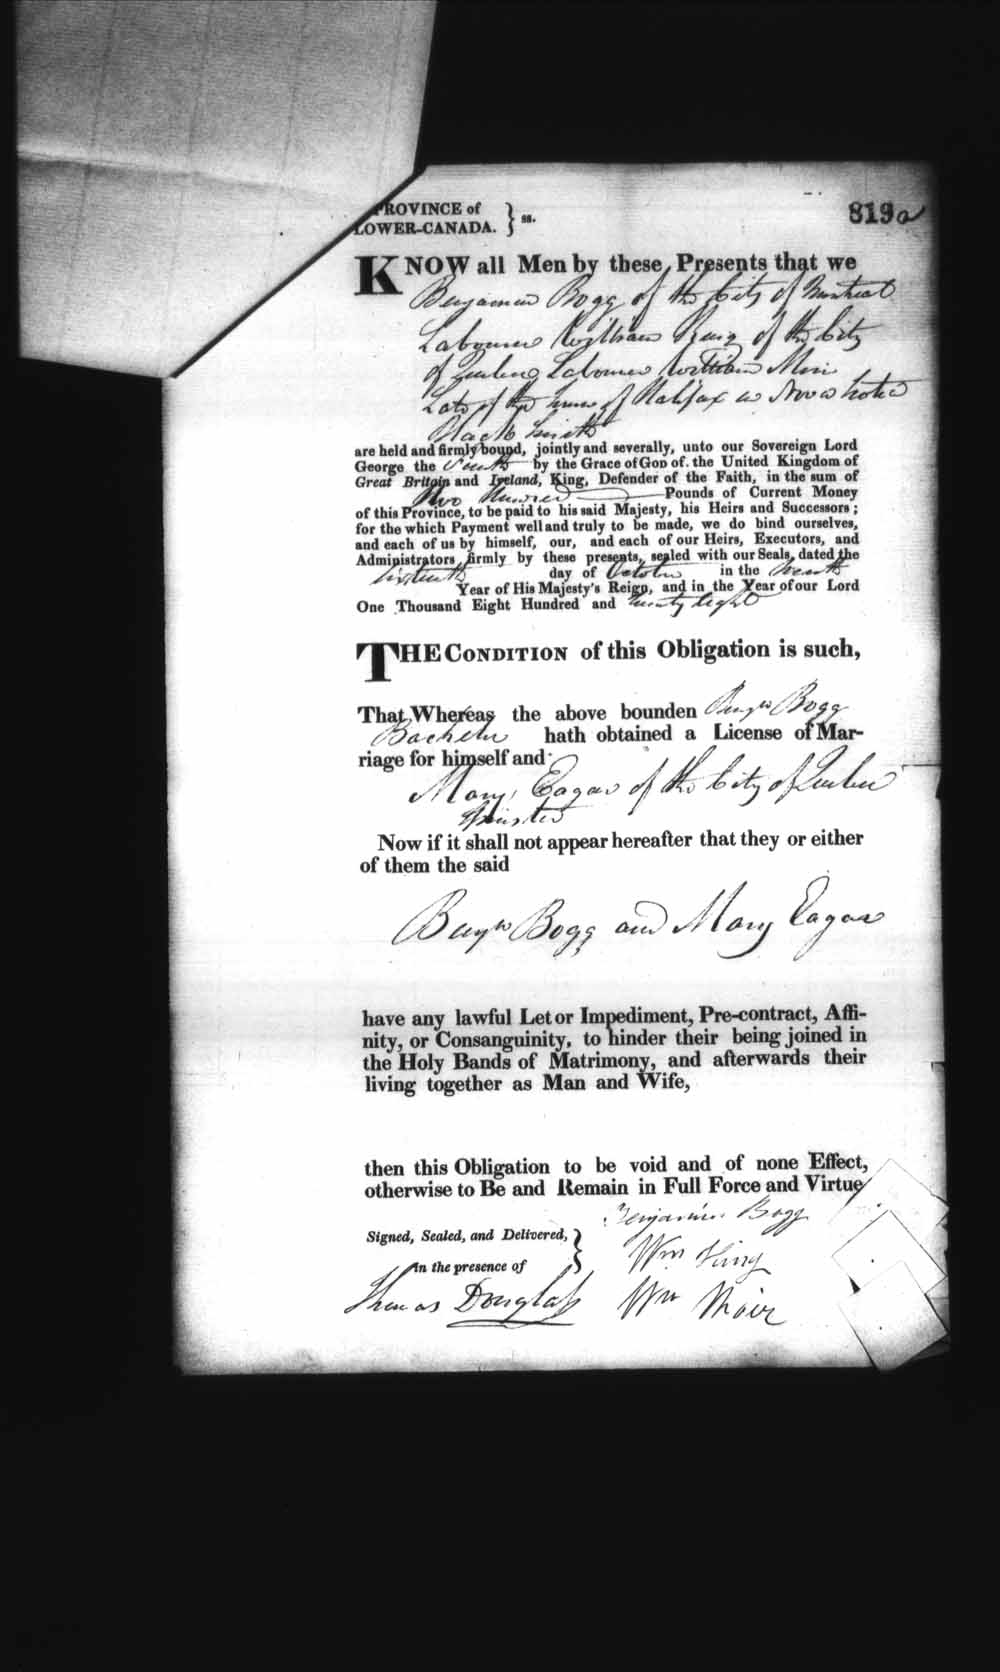 Digitized page of Upper and Lower Canada Marriage Bonds (1779-1865) for Image No.: e008236899